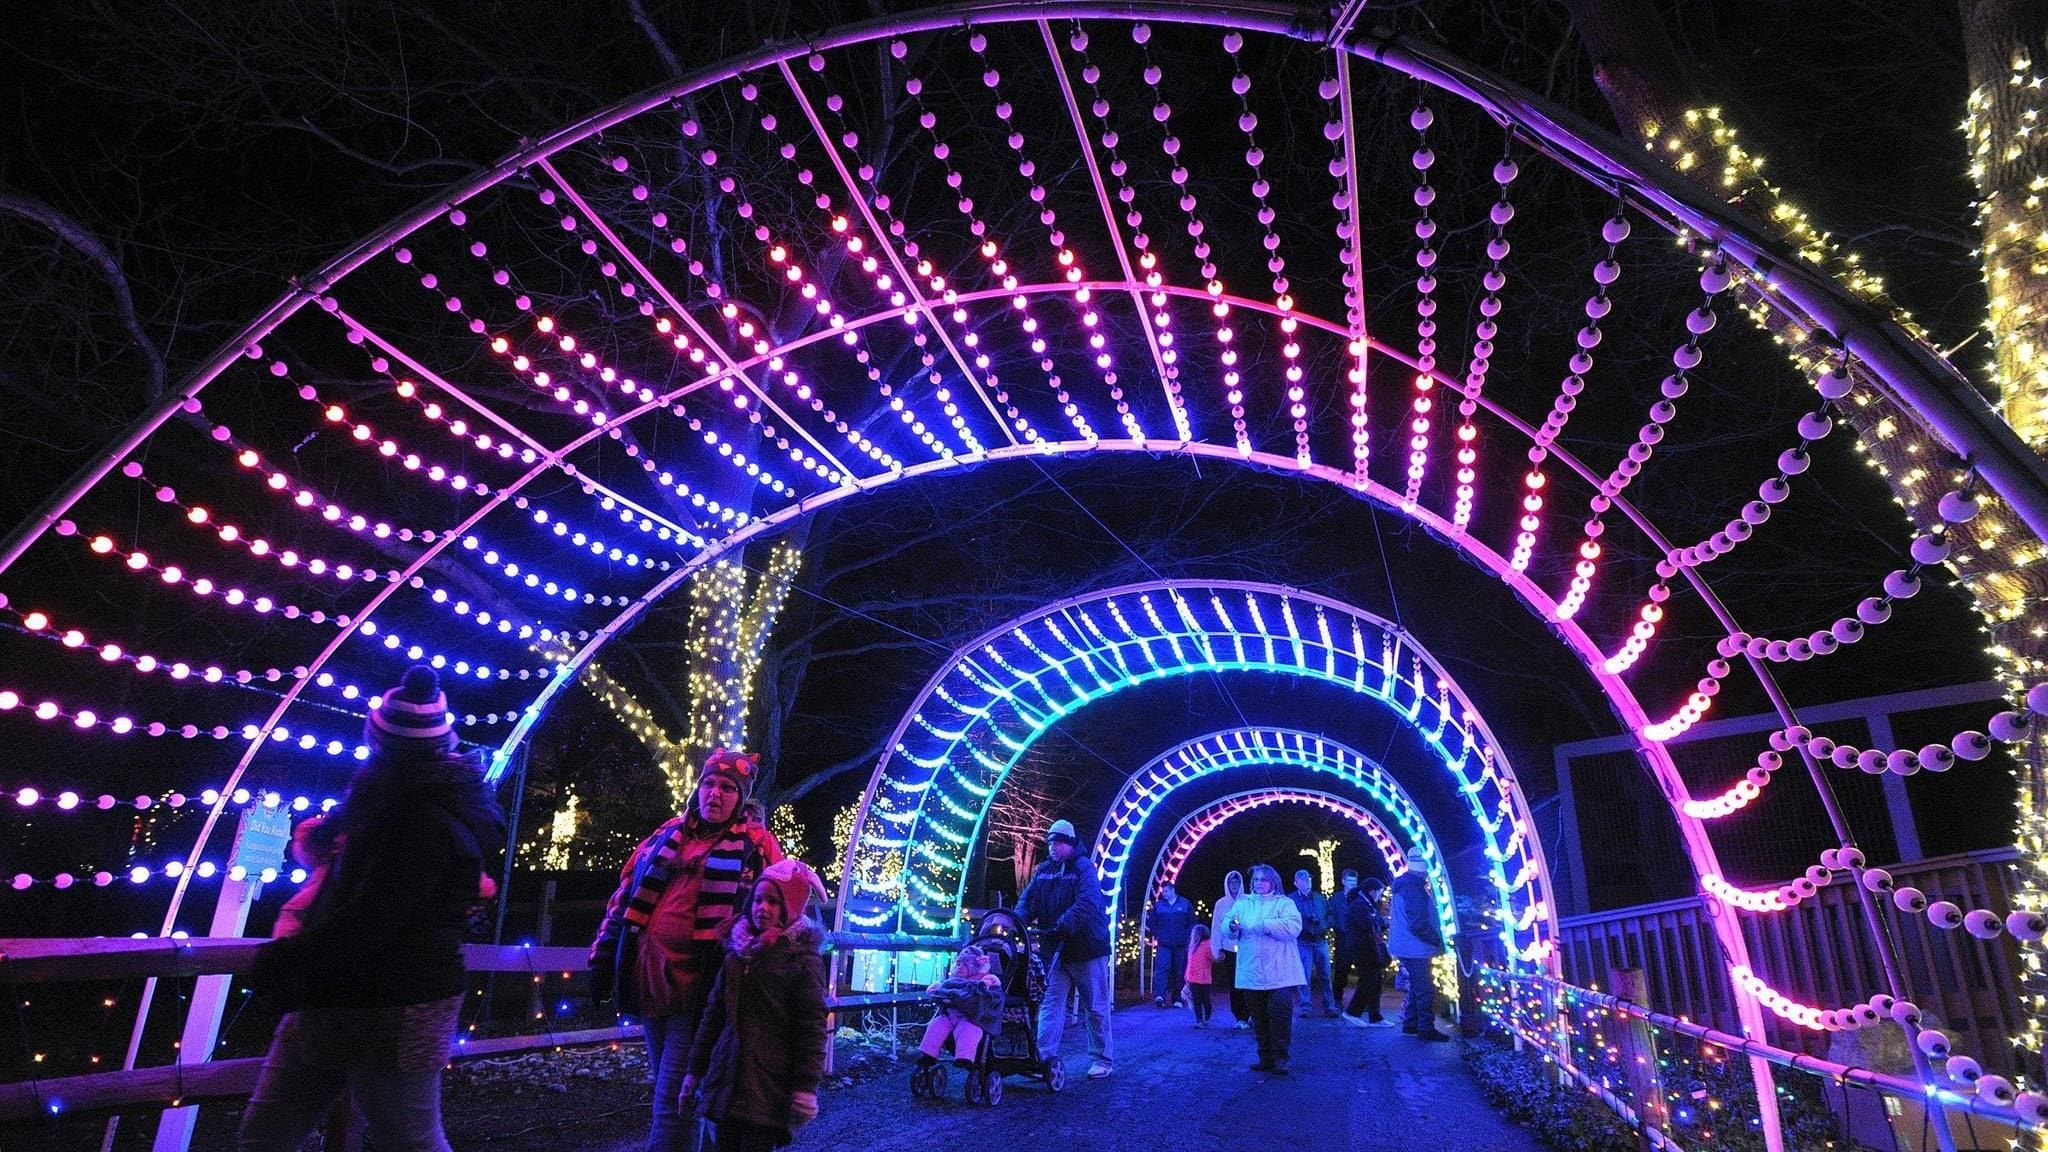 Hunter Valley Christmas Lights Spectacular Image -5b3ab8c0a2dc0